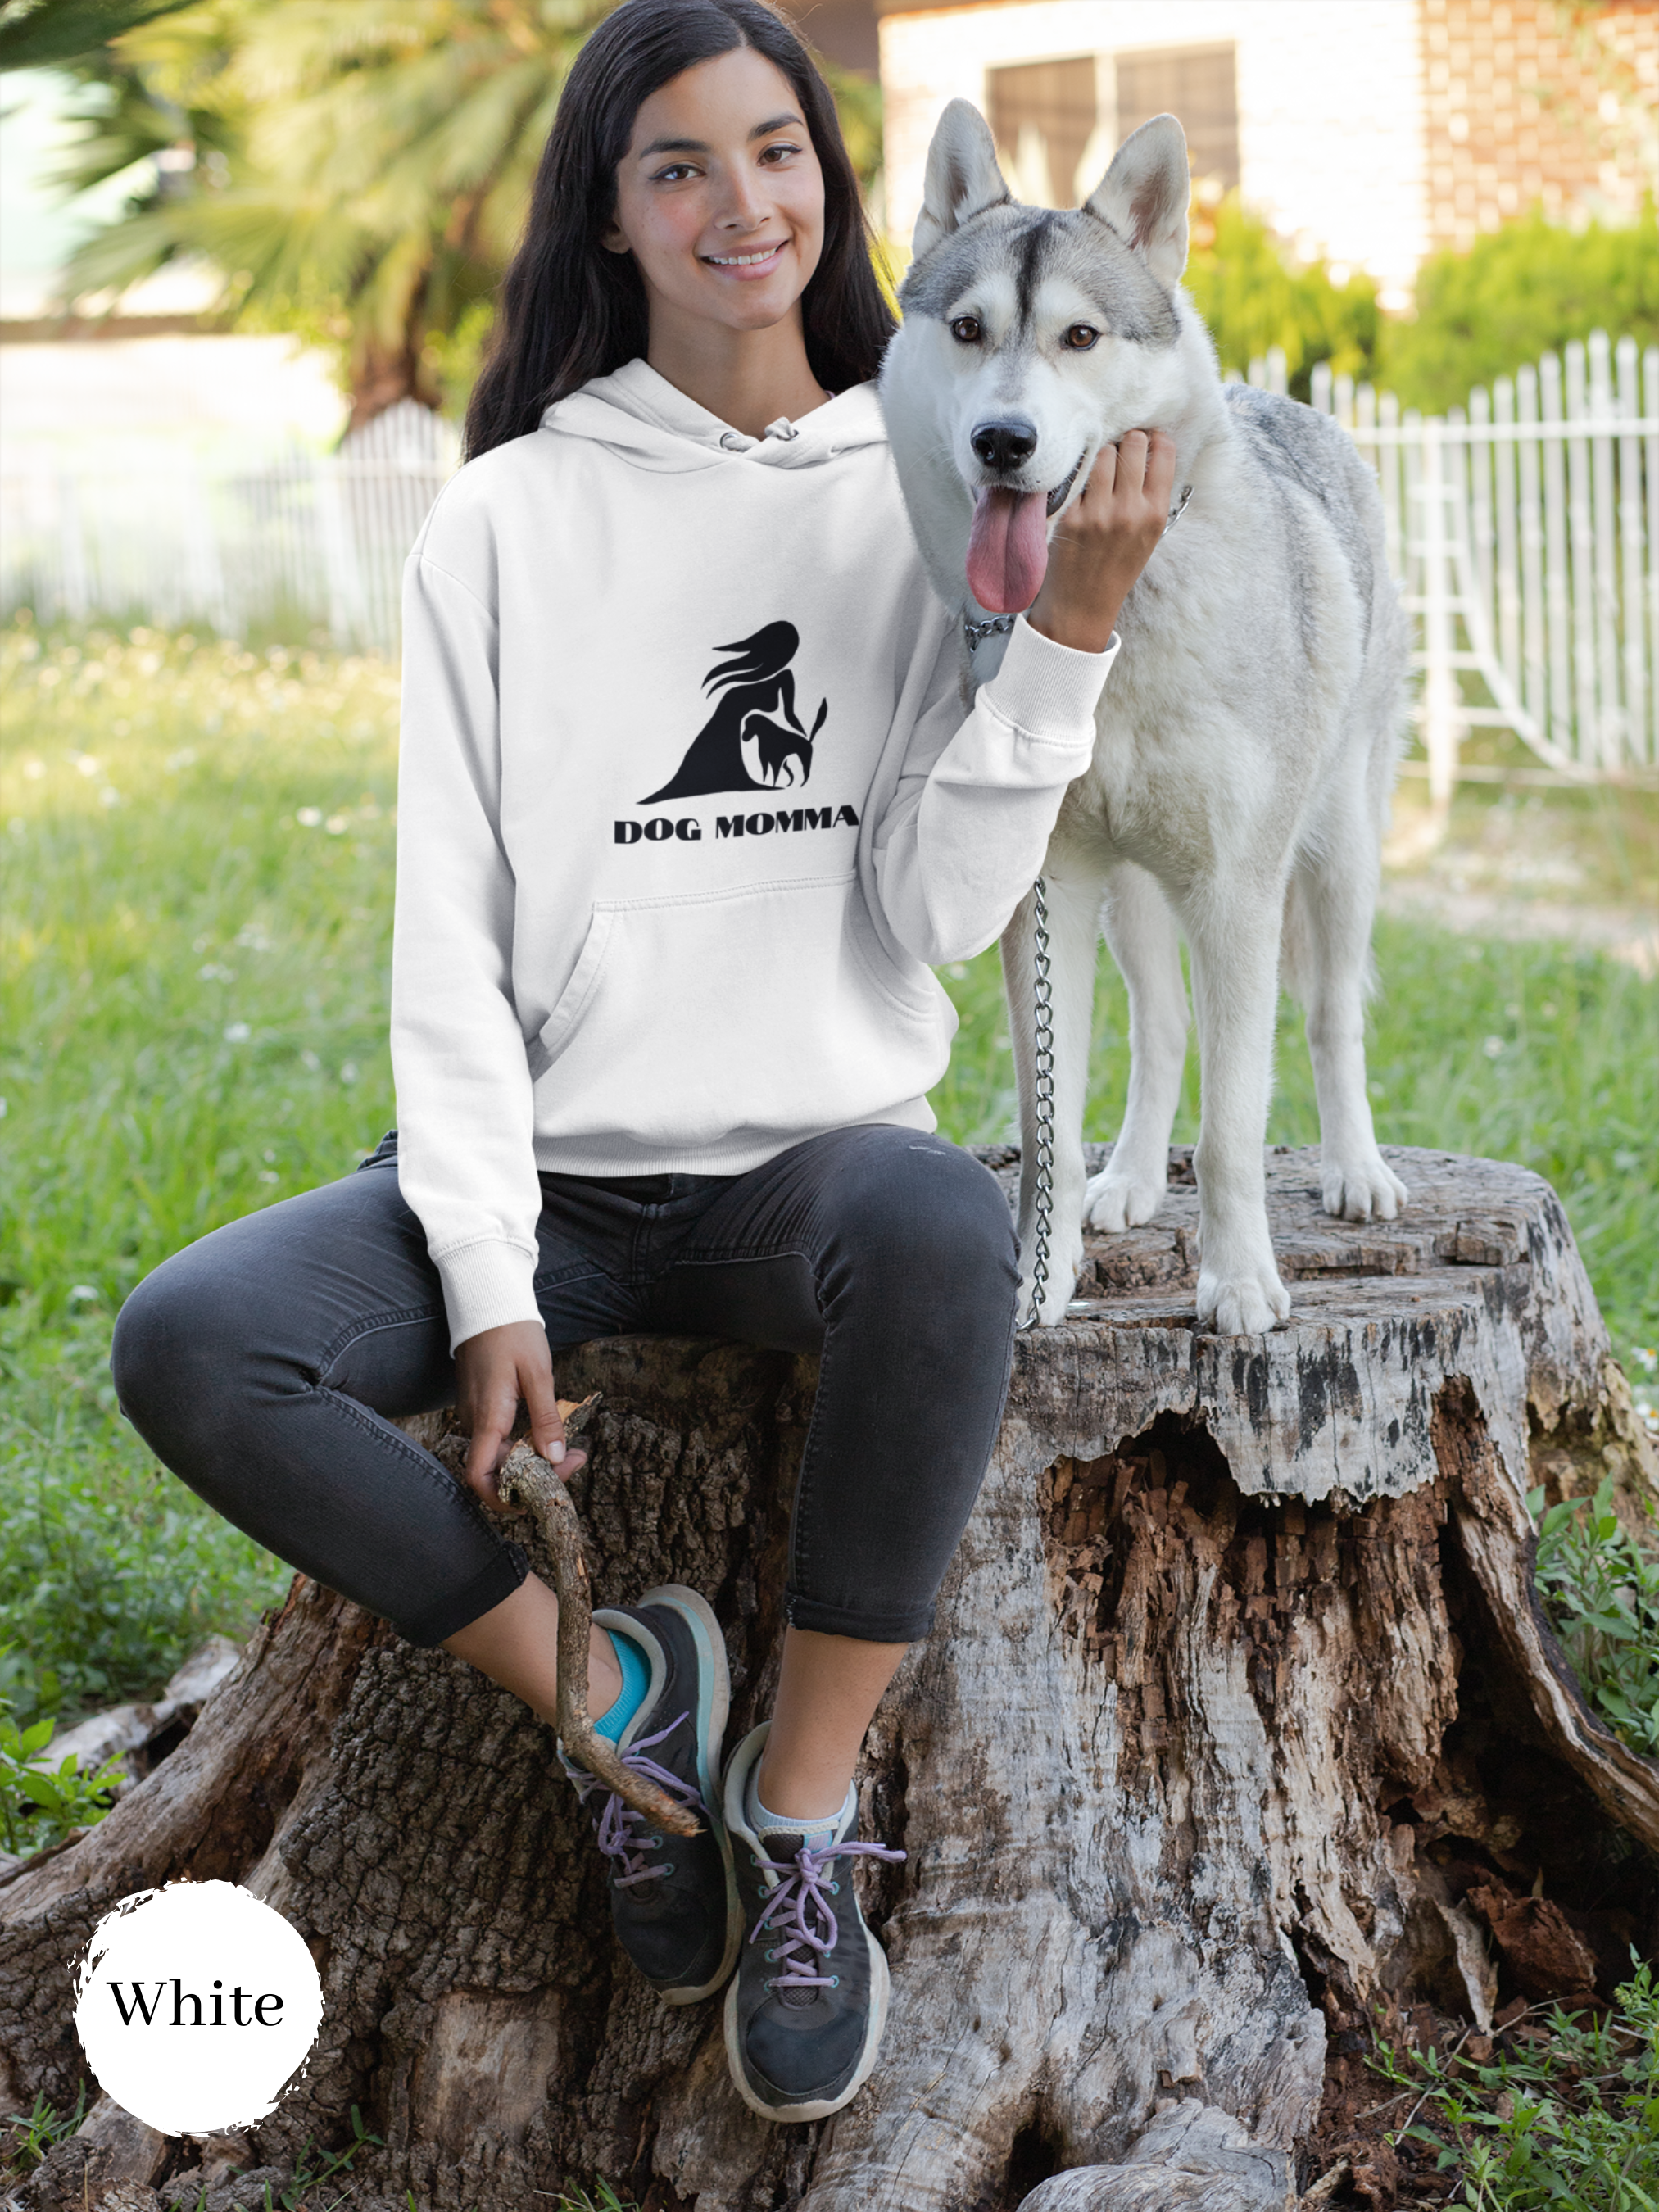 Dog Momma Hoodie: Cute Dog Mom Life Apparel and Cozy Gift for Pet Owners, Dog Mom Fashion with Dog Mom Quotes and Humor